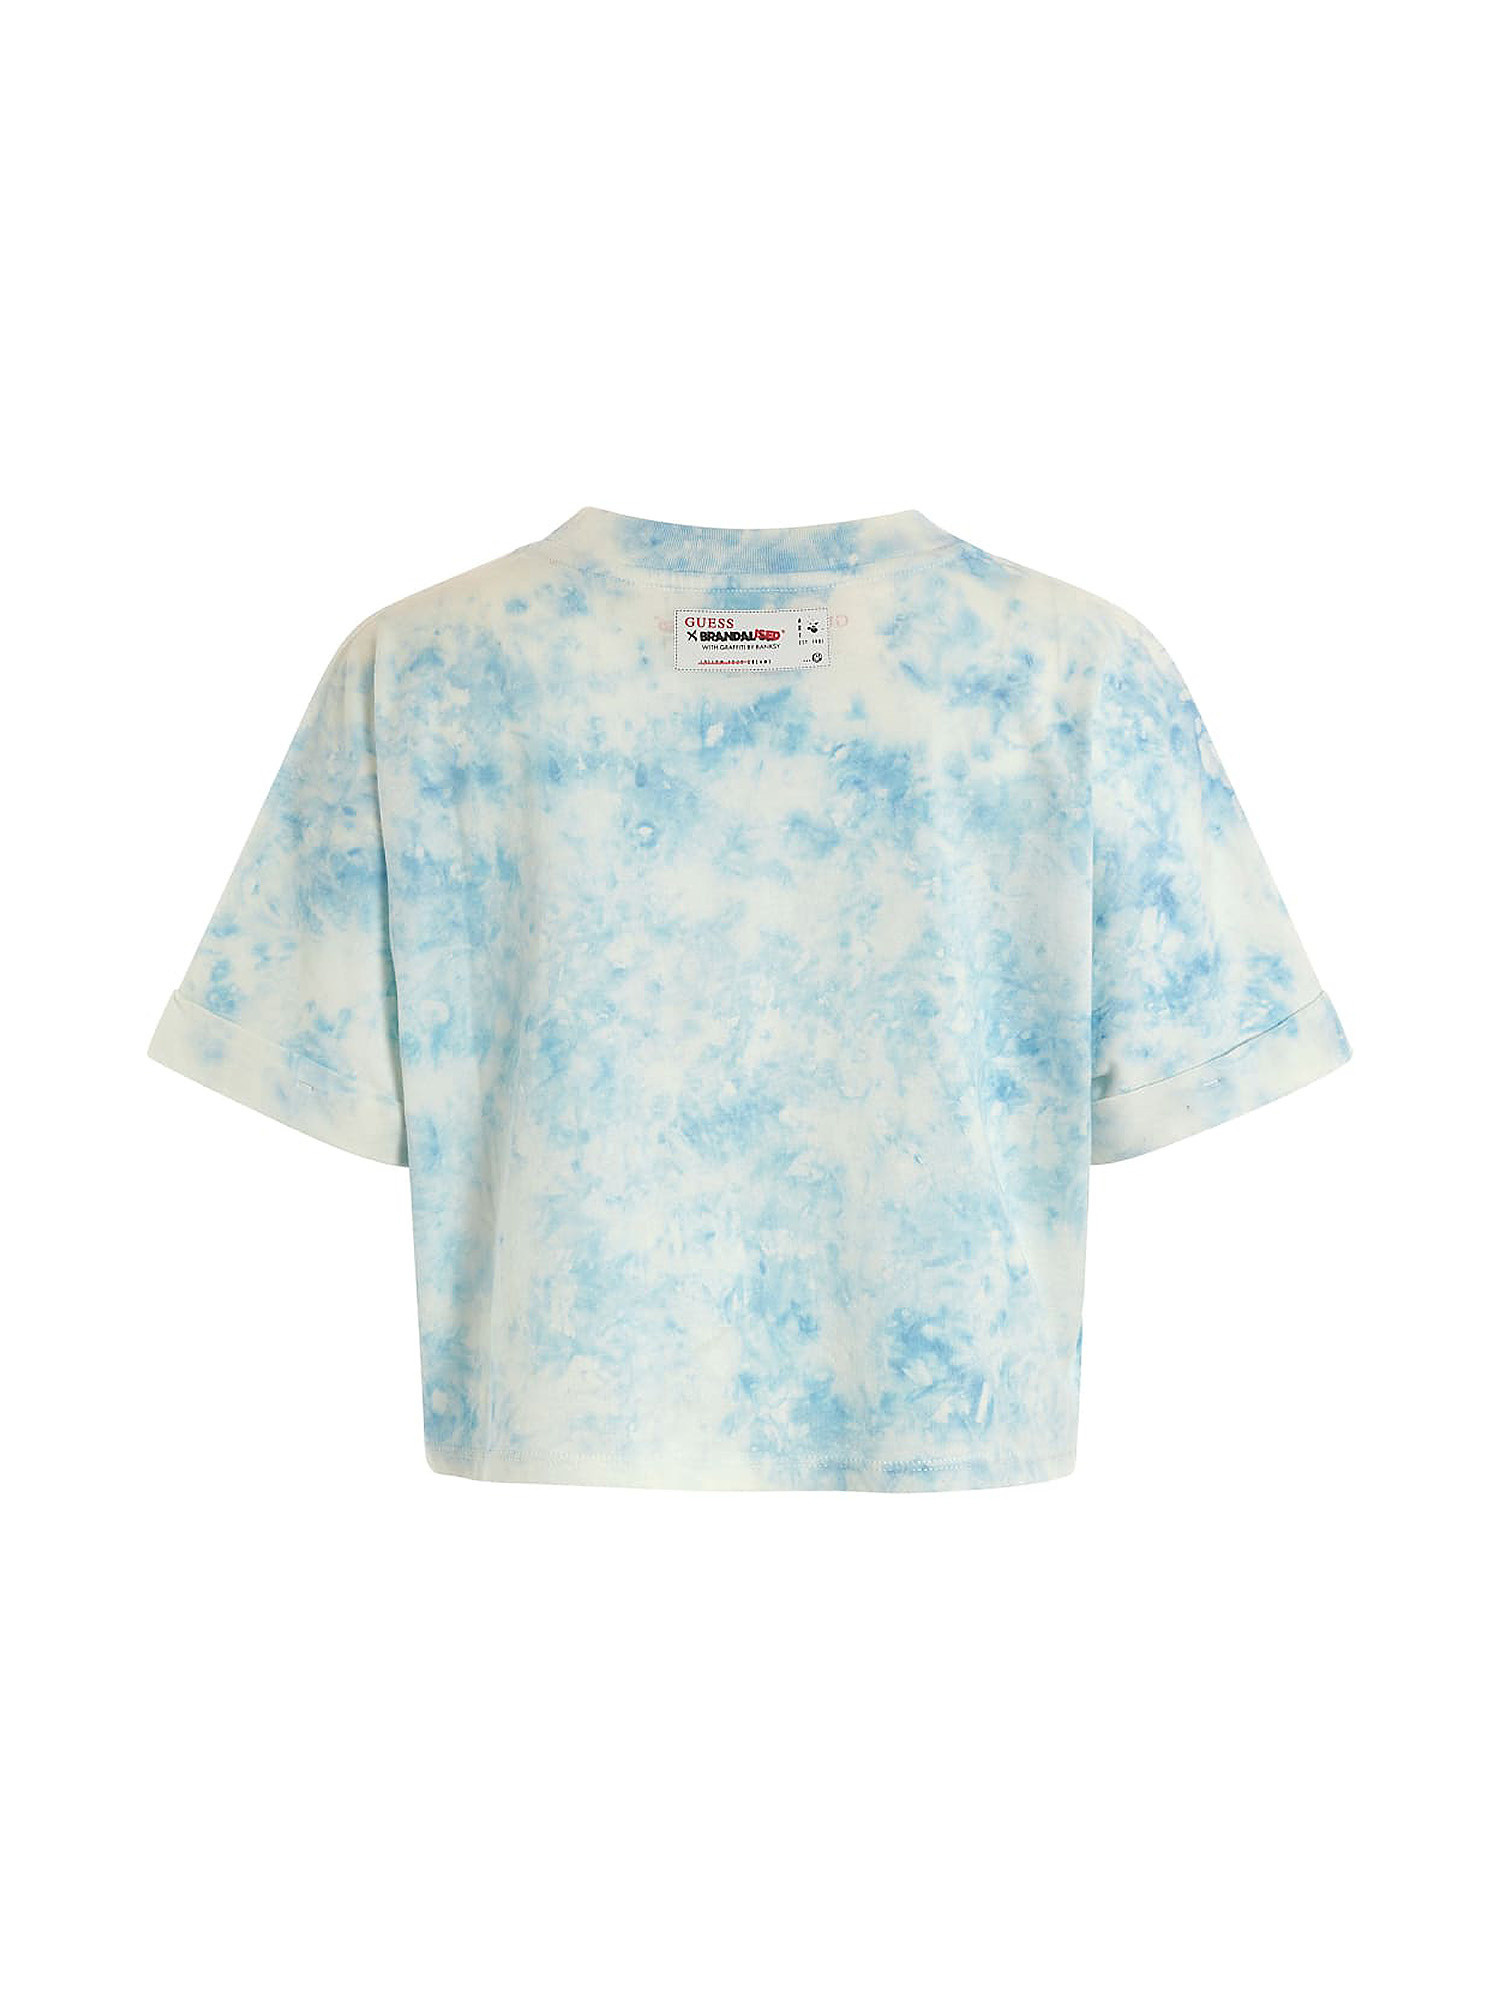 GUESS - T-shirt tie-dye, Azzurro, large image number 1